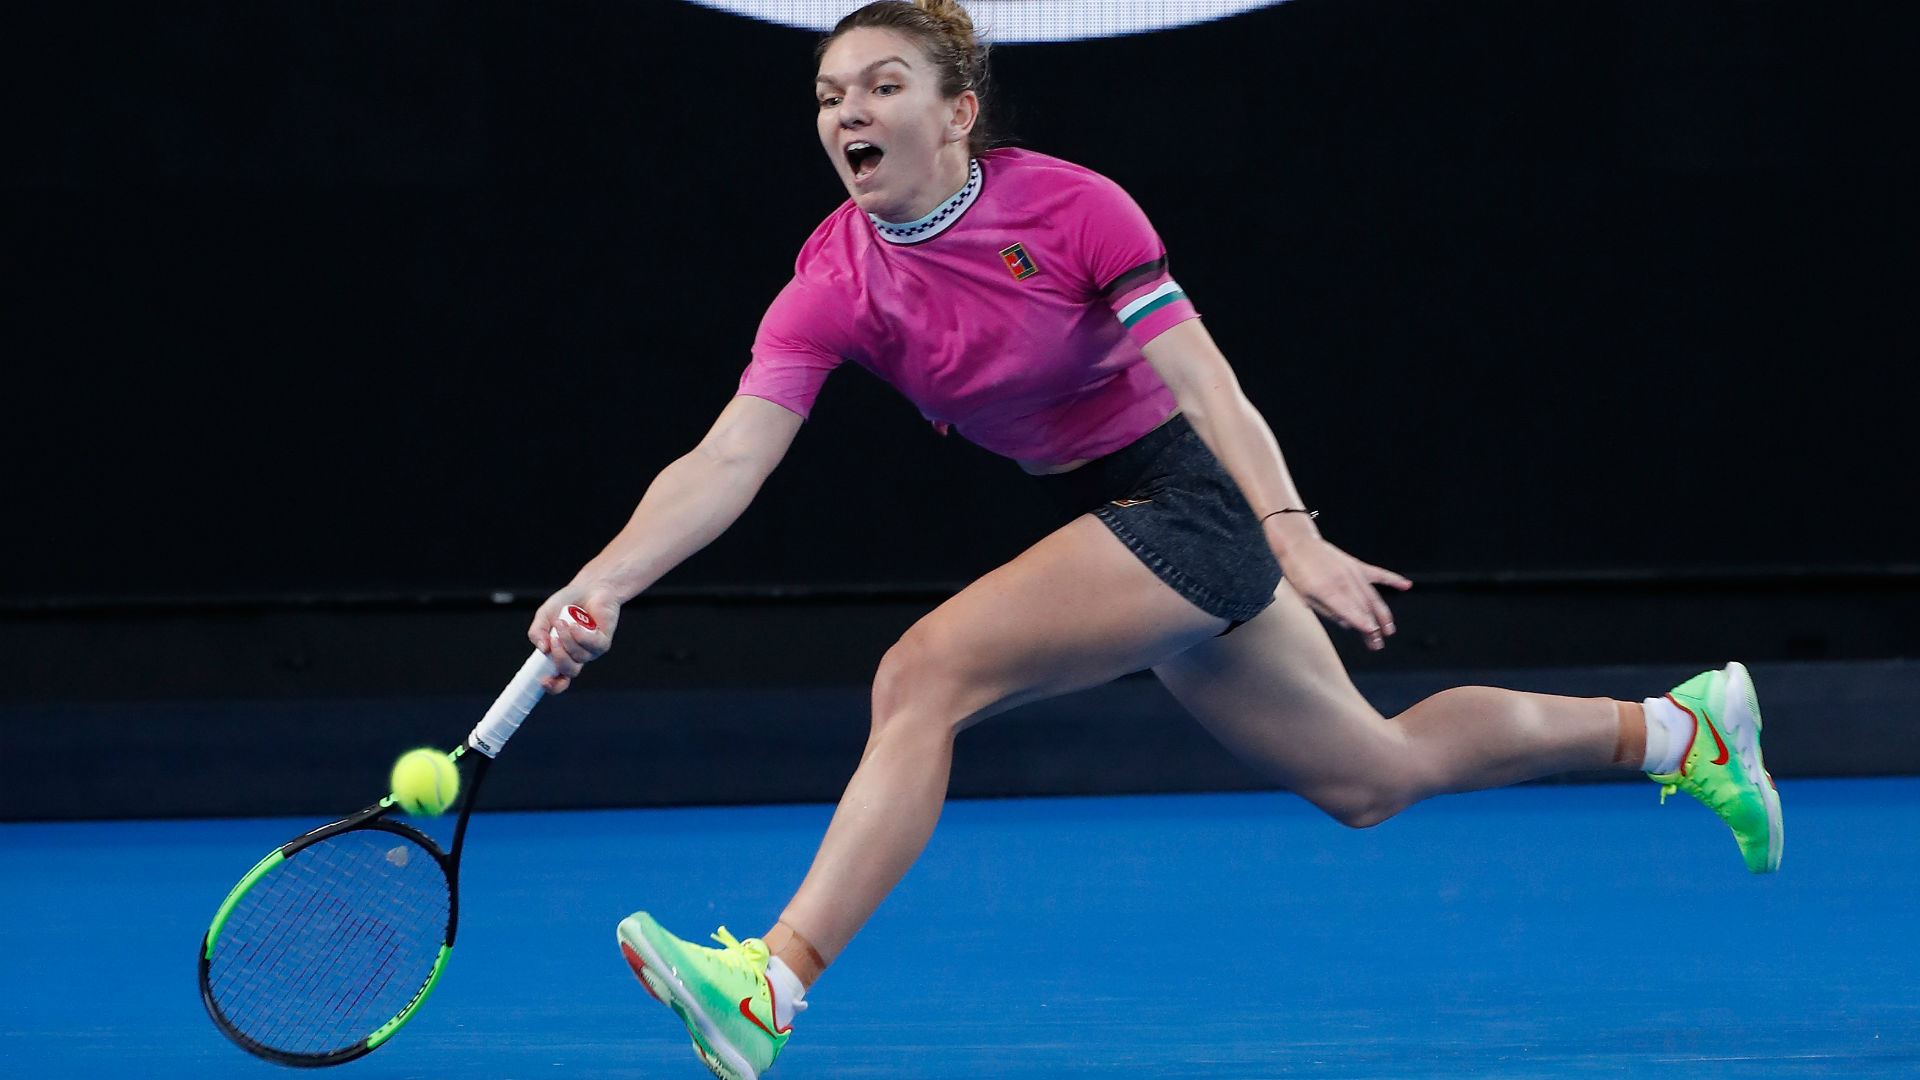 Kaia Kanepi looked capable of inflicting another grand slam defeat on Simona Halep, but the Australian Open's top seed fought back superbly.